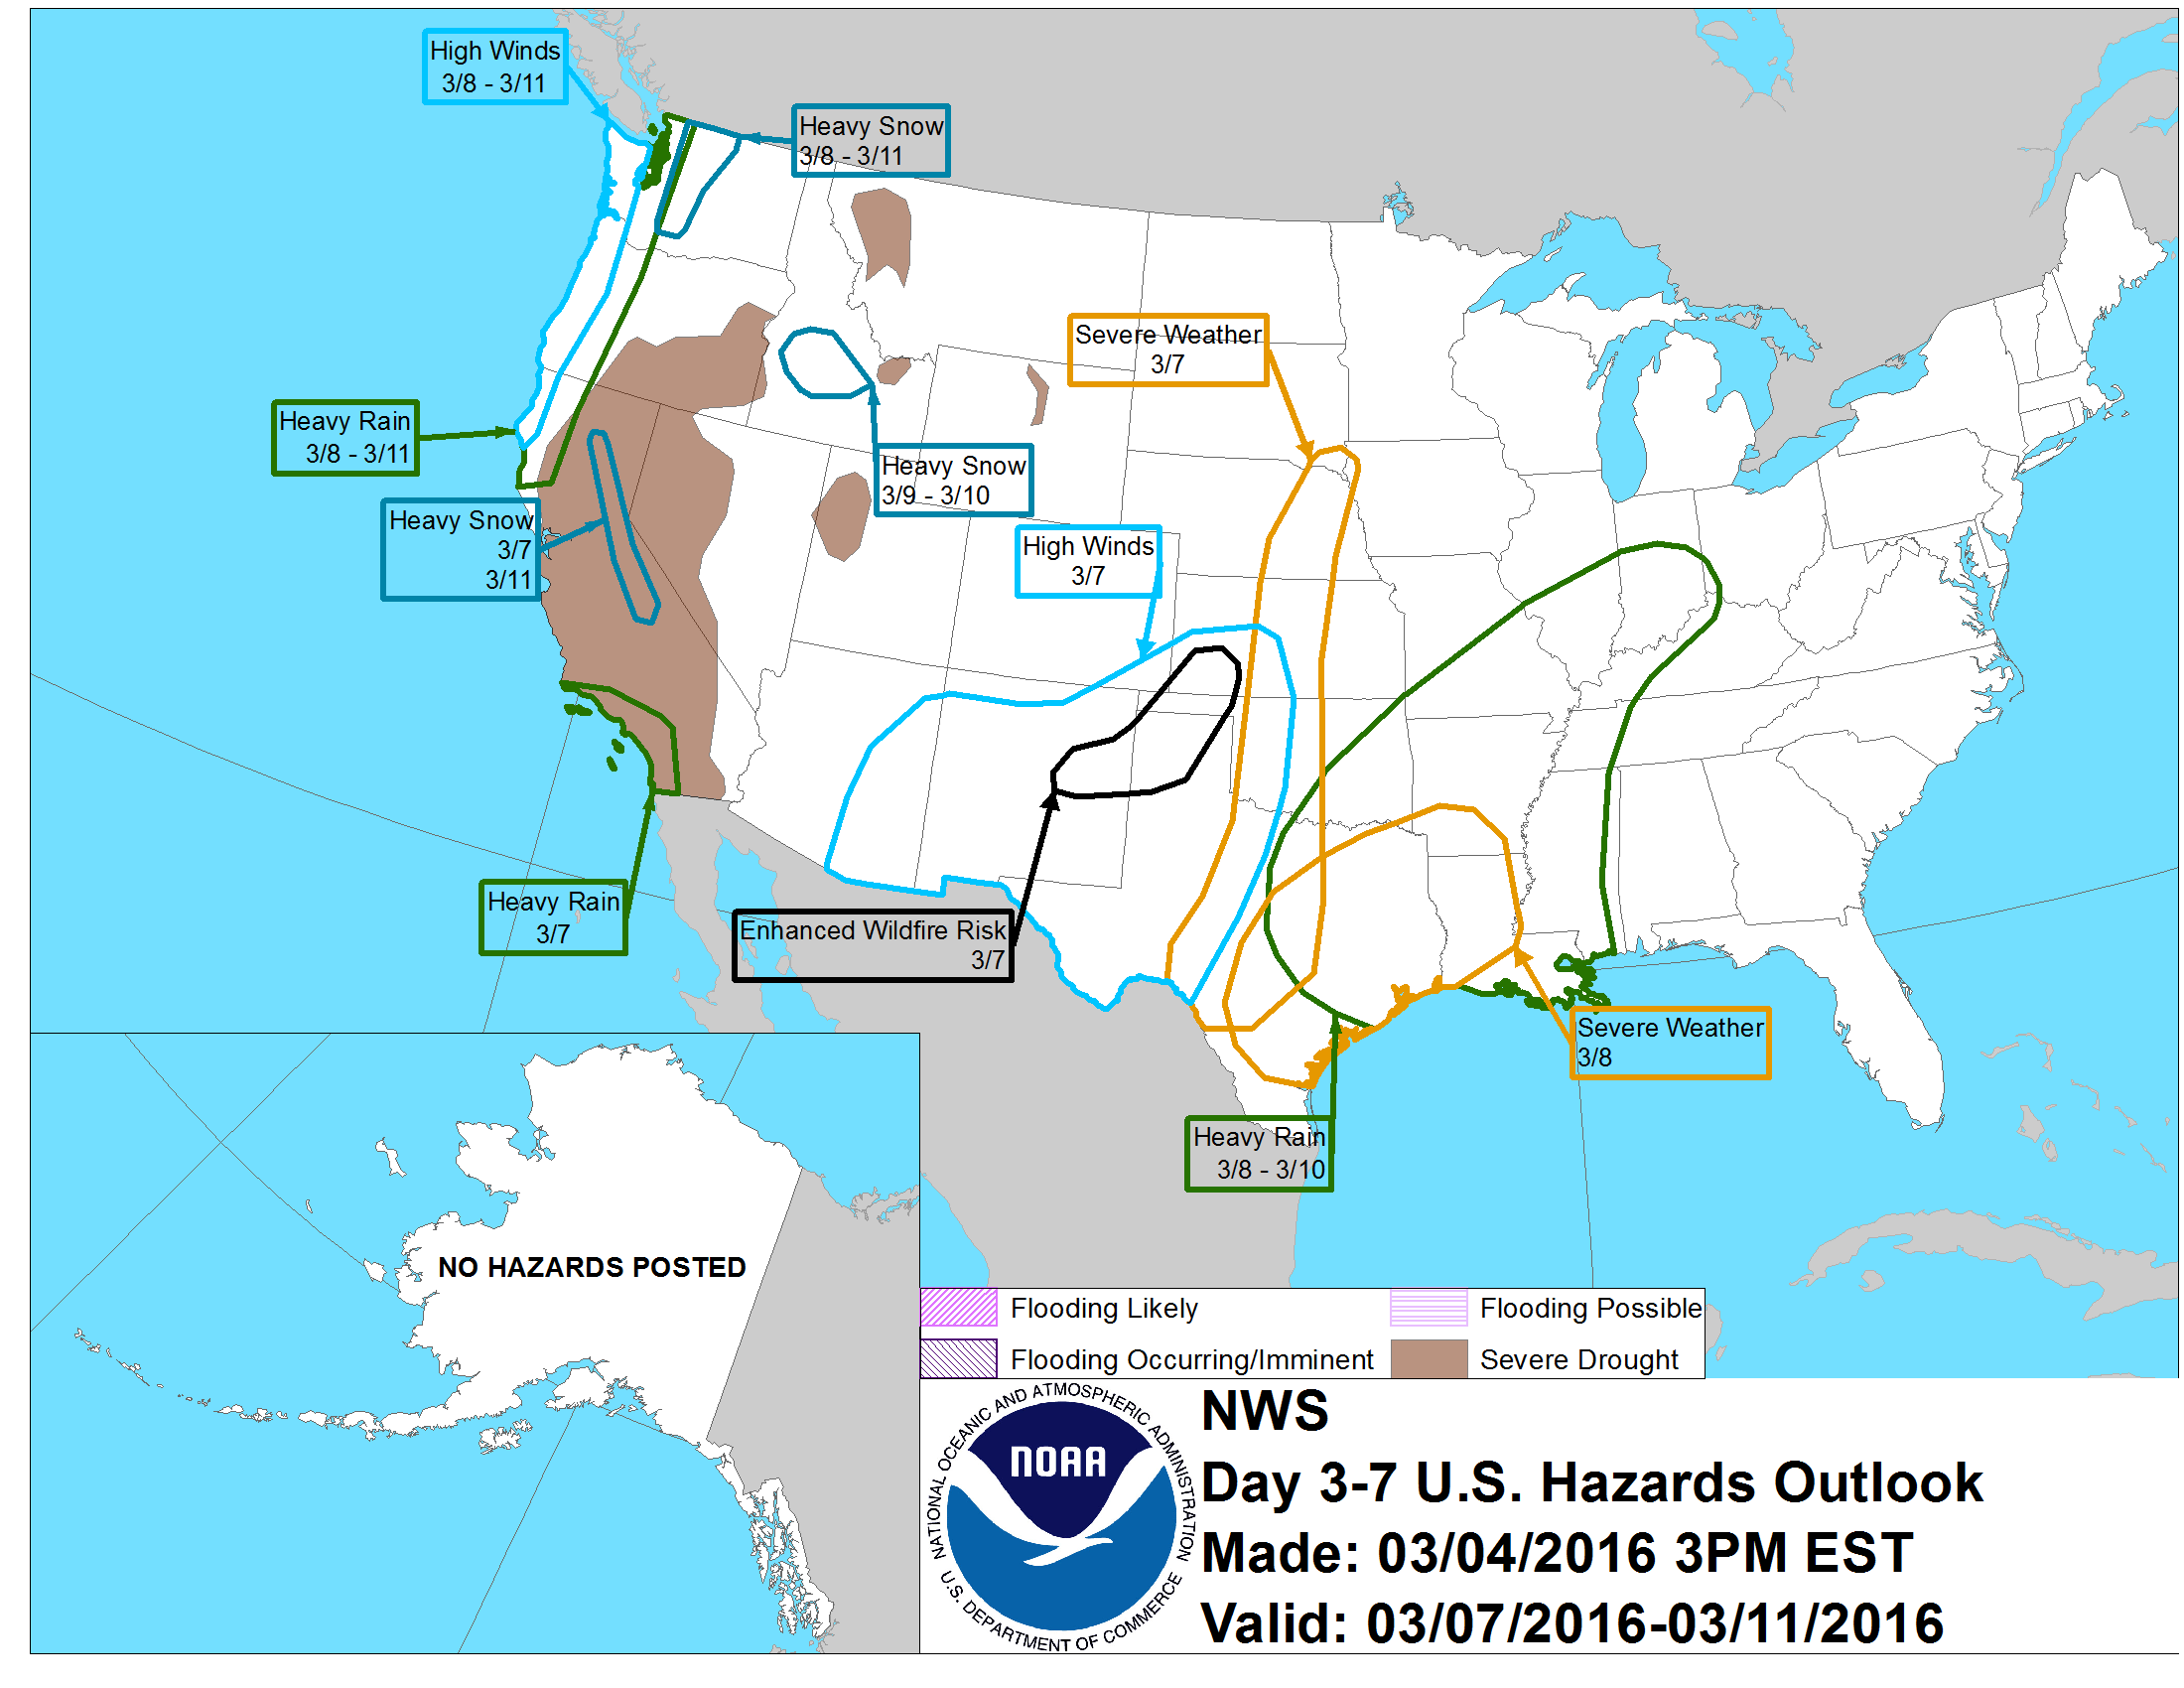 "Heavy Snow" forecast in CA from March 7-11th. image: noaa, today